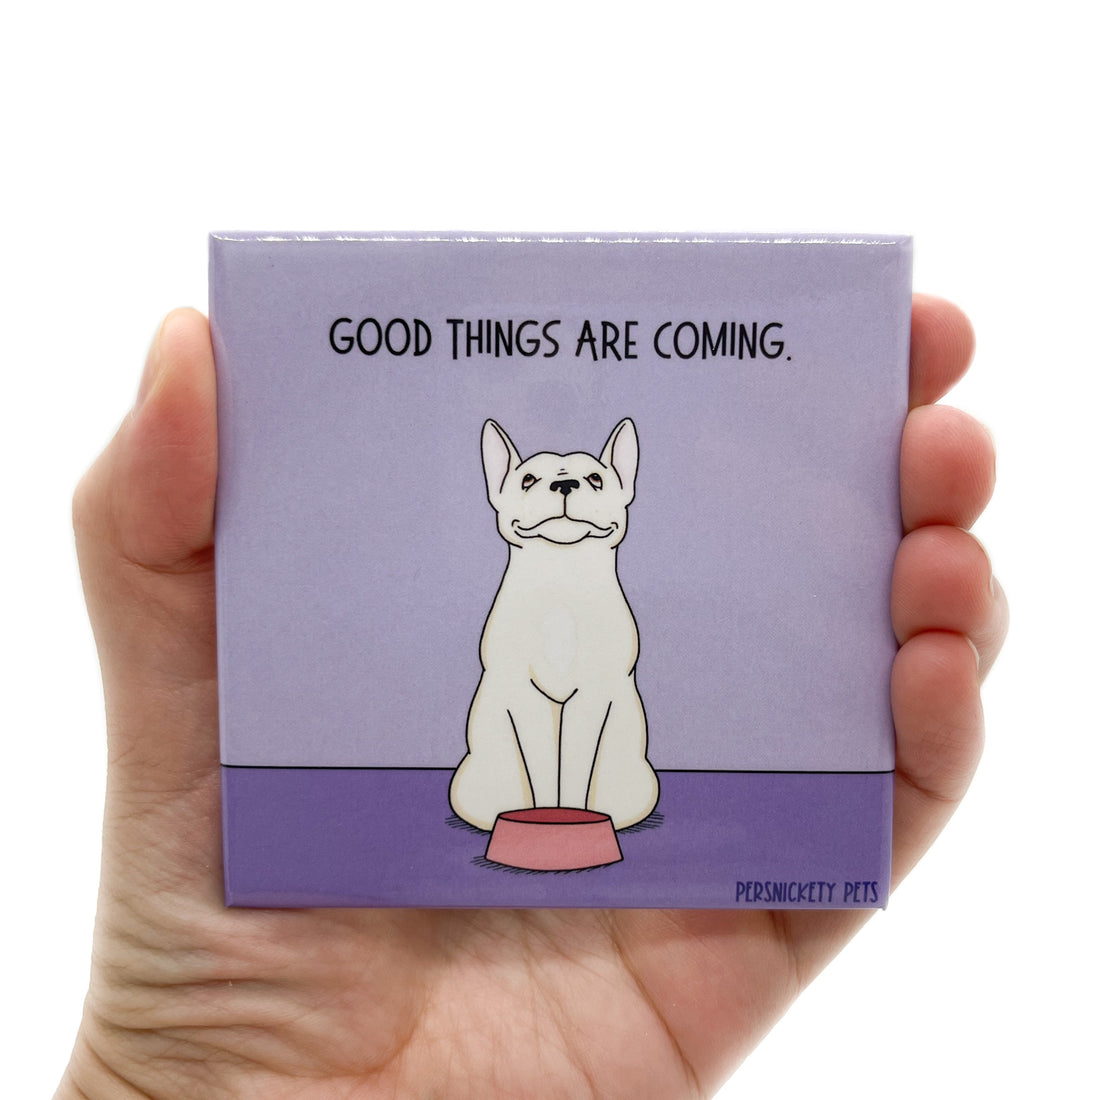 Persnickety Pets: Good Things are Coming fridge magnet in hand